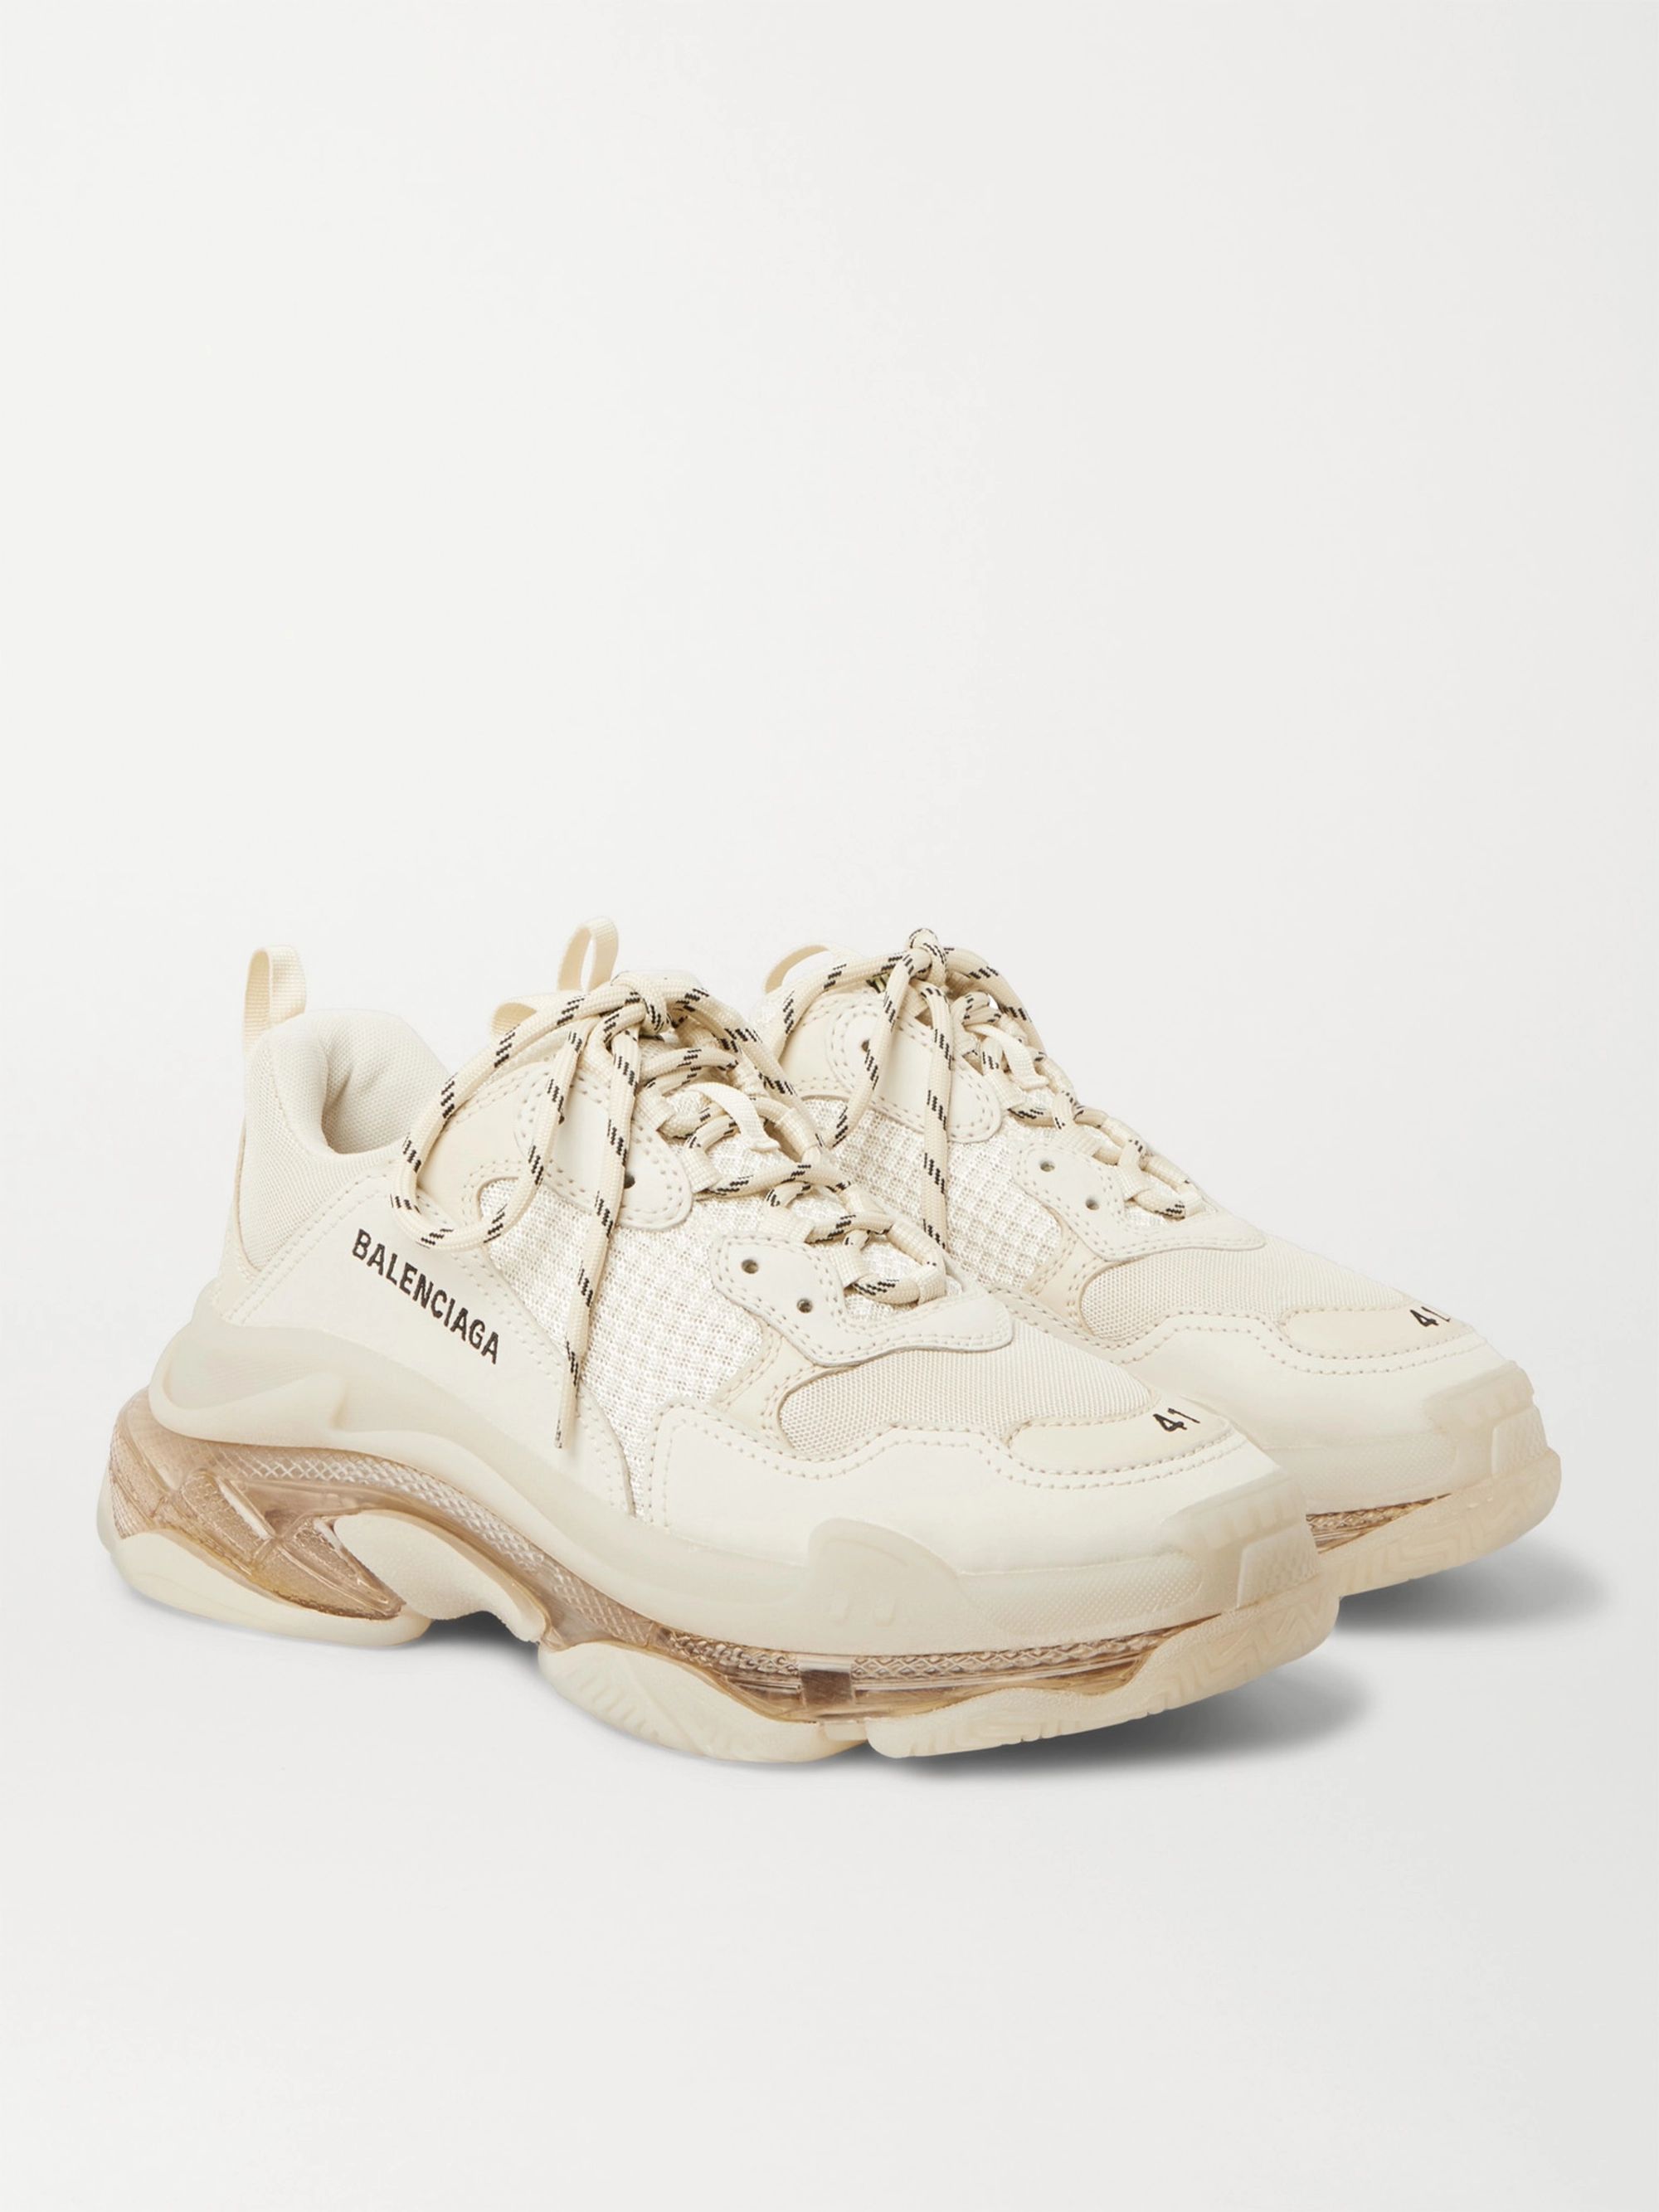 For sale The best Balenciaga Triple S Trainers White Black